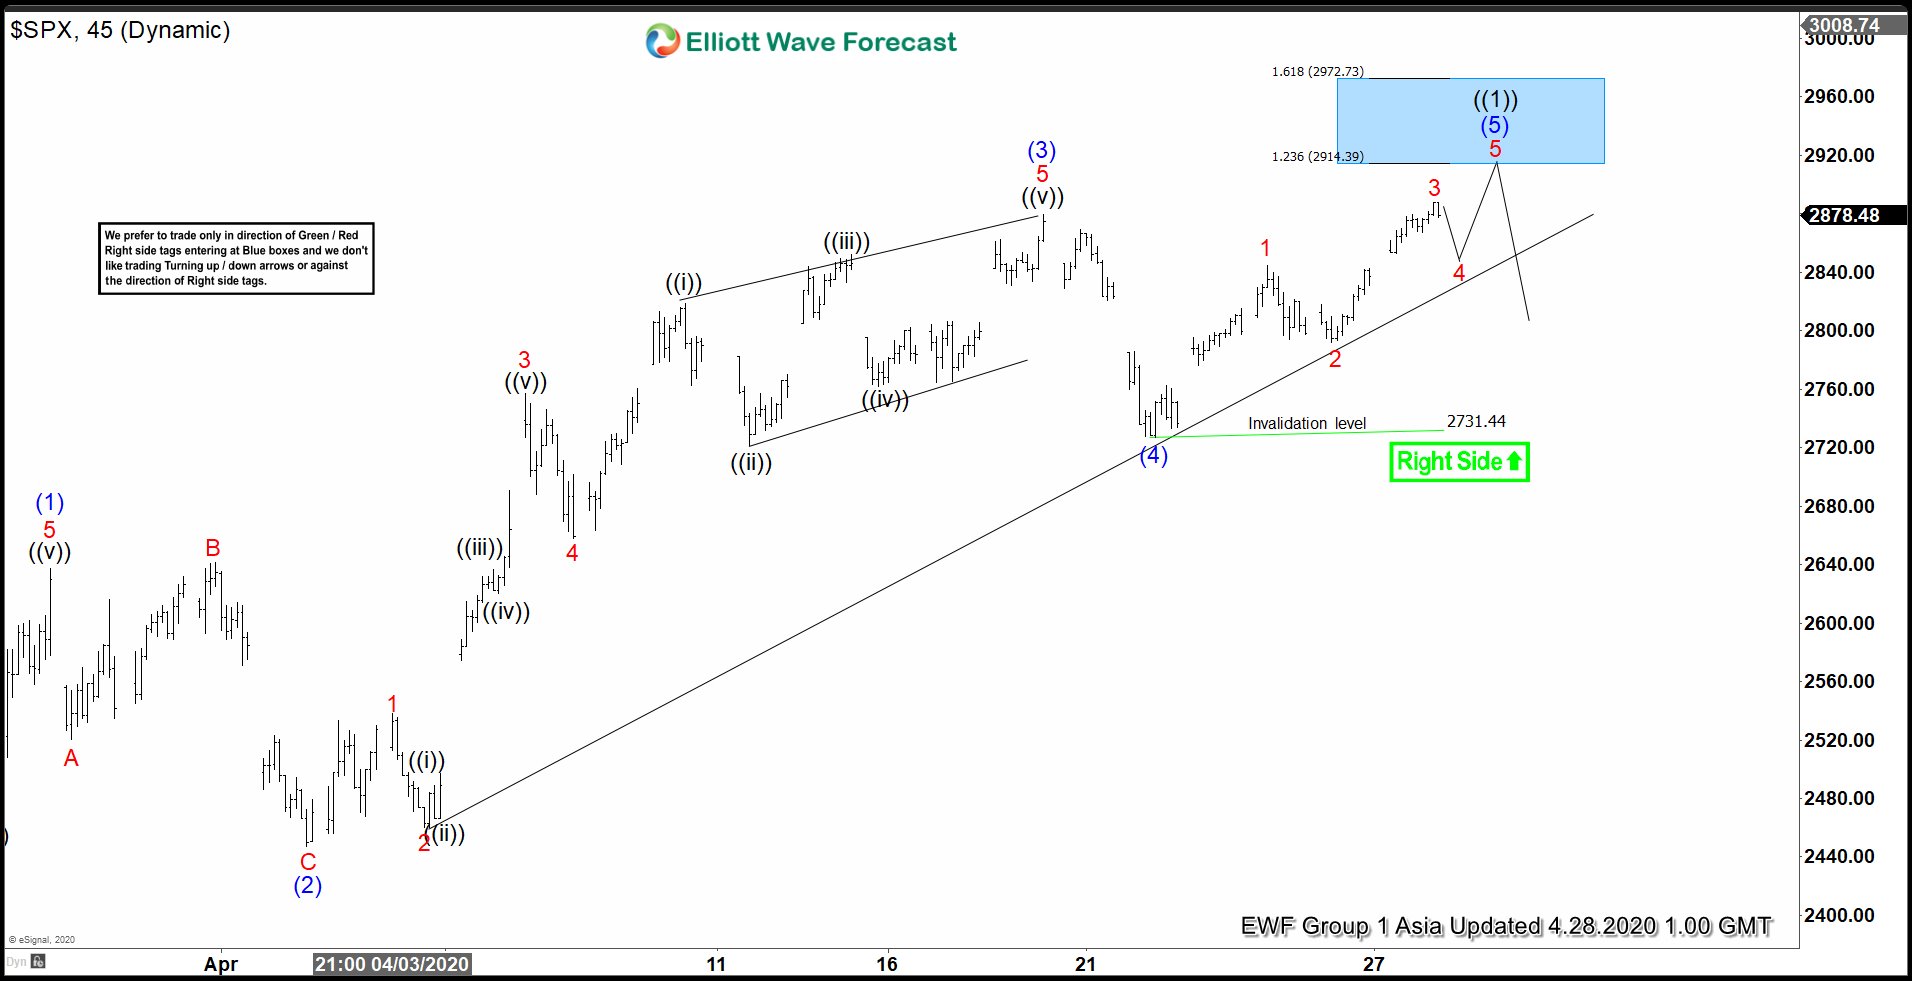 Elliott Wave View: SPX Rally from March Low as an Impulse